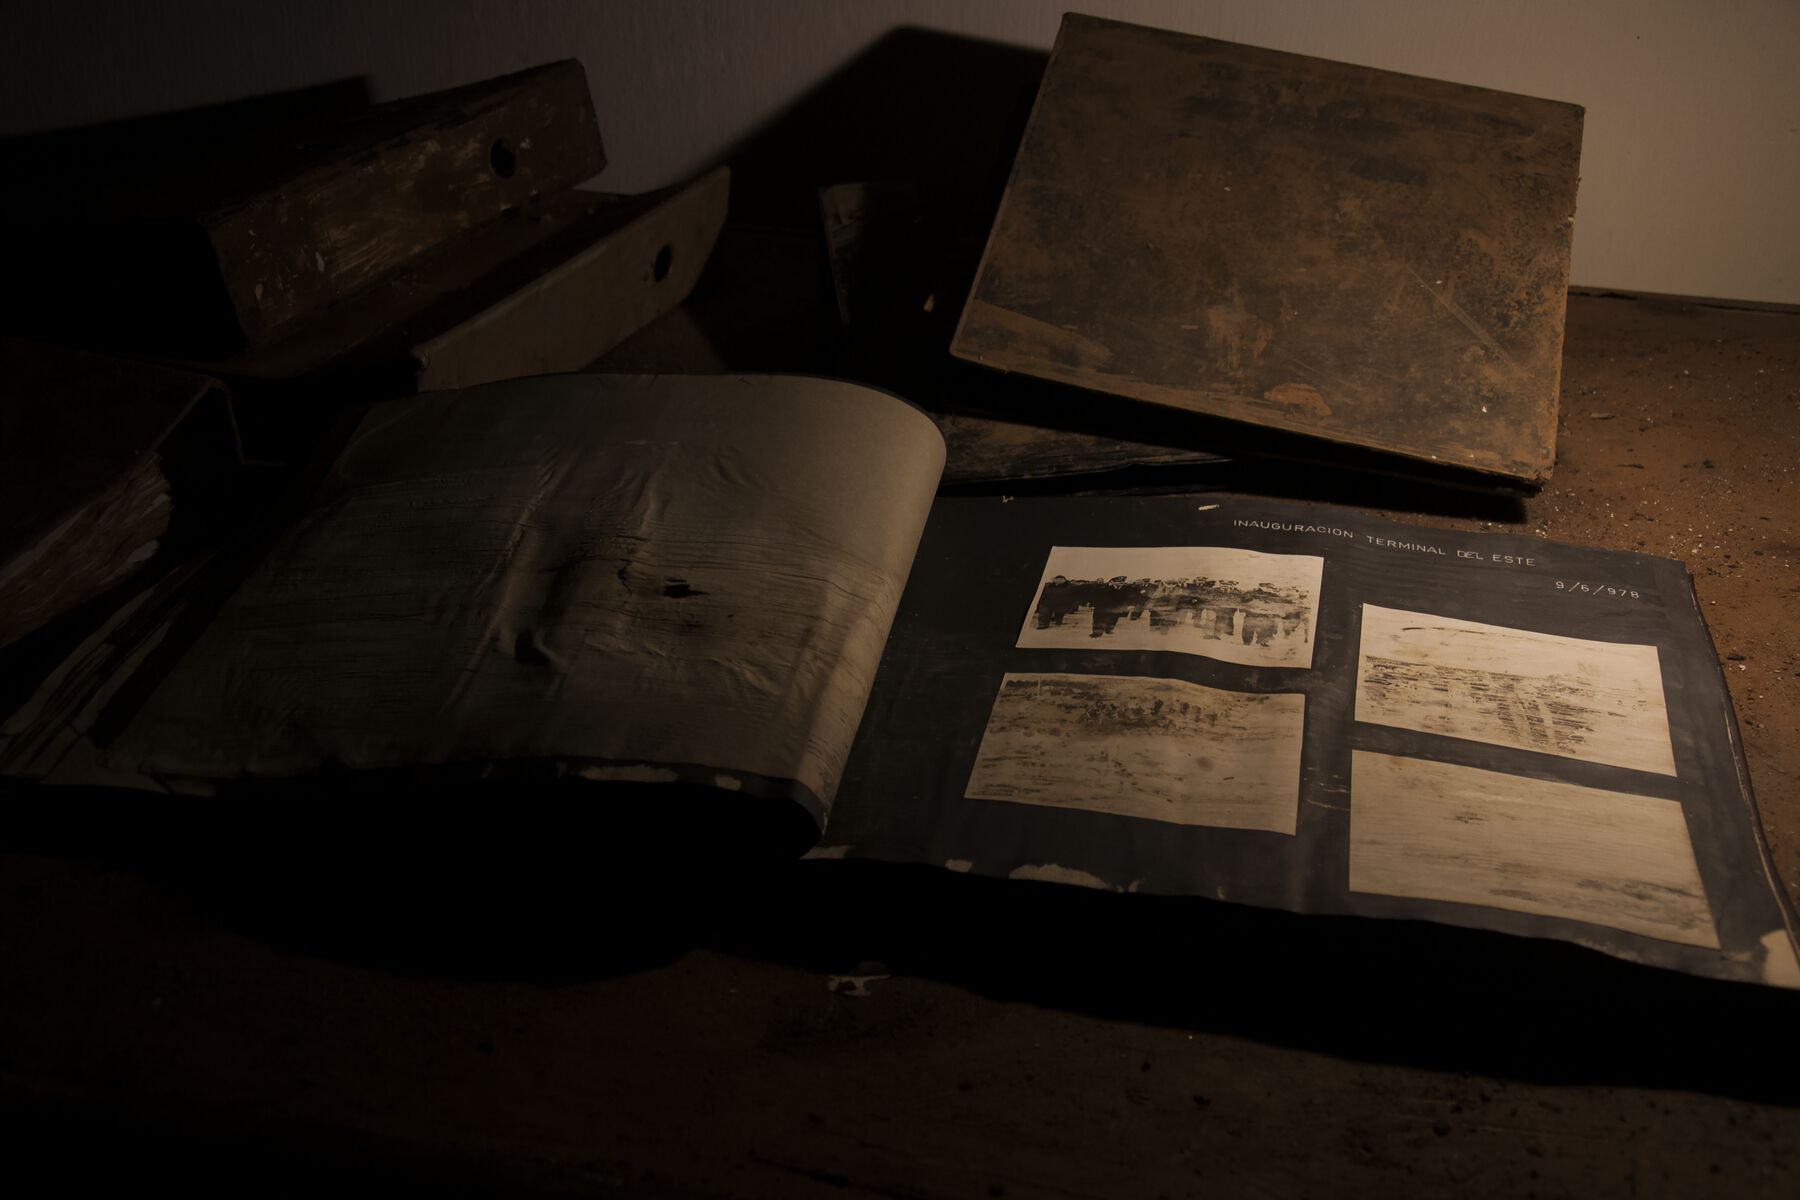 A close-up view of the lightly lit desk showcasing an open book with 4 deteriorating black and white photos